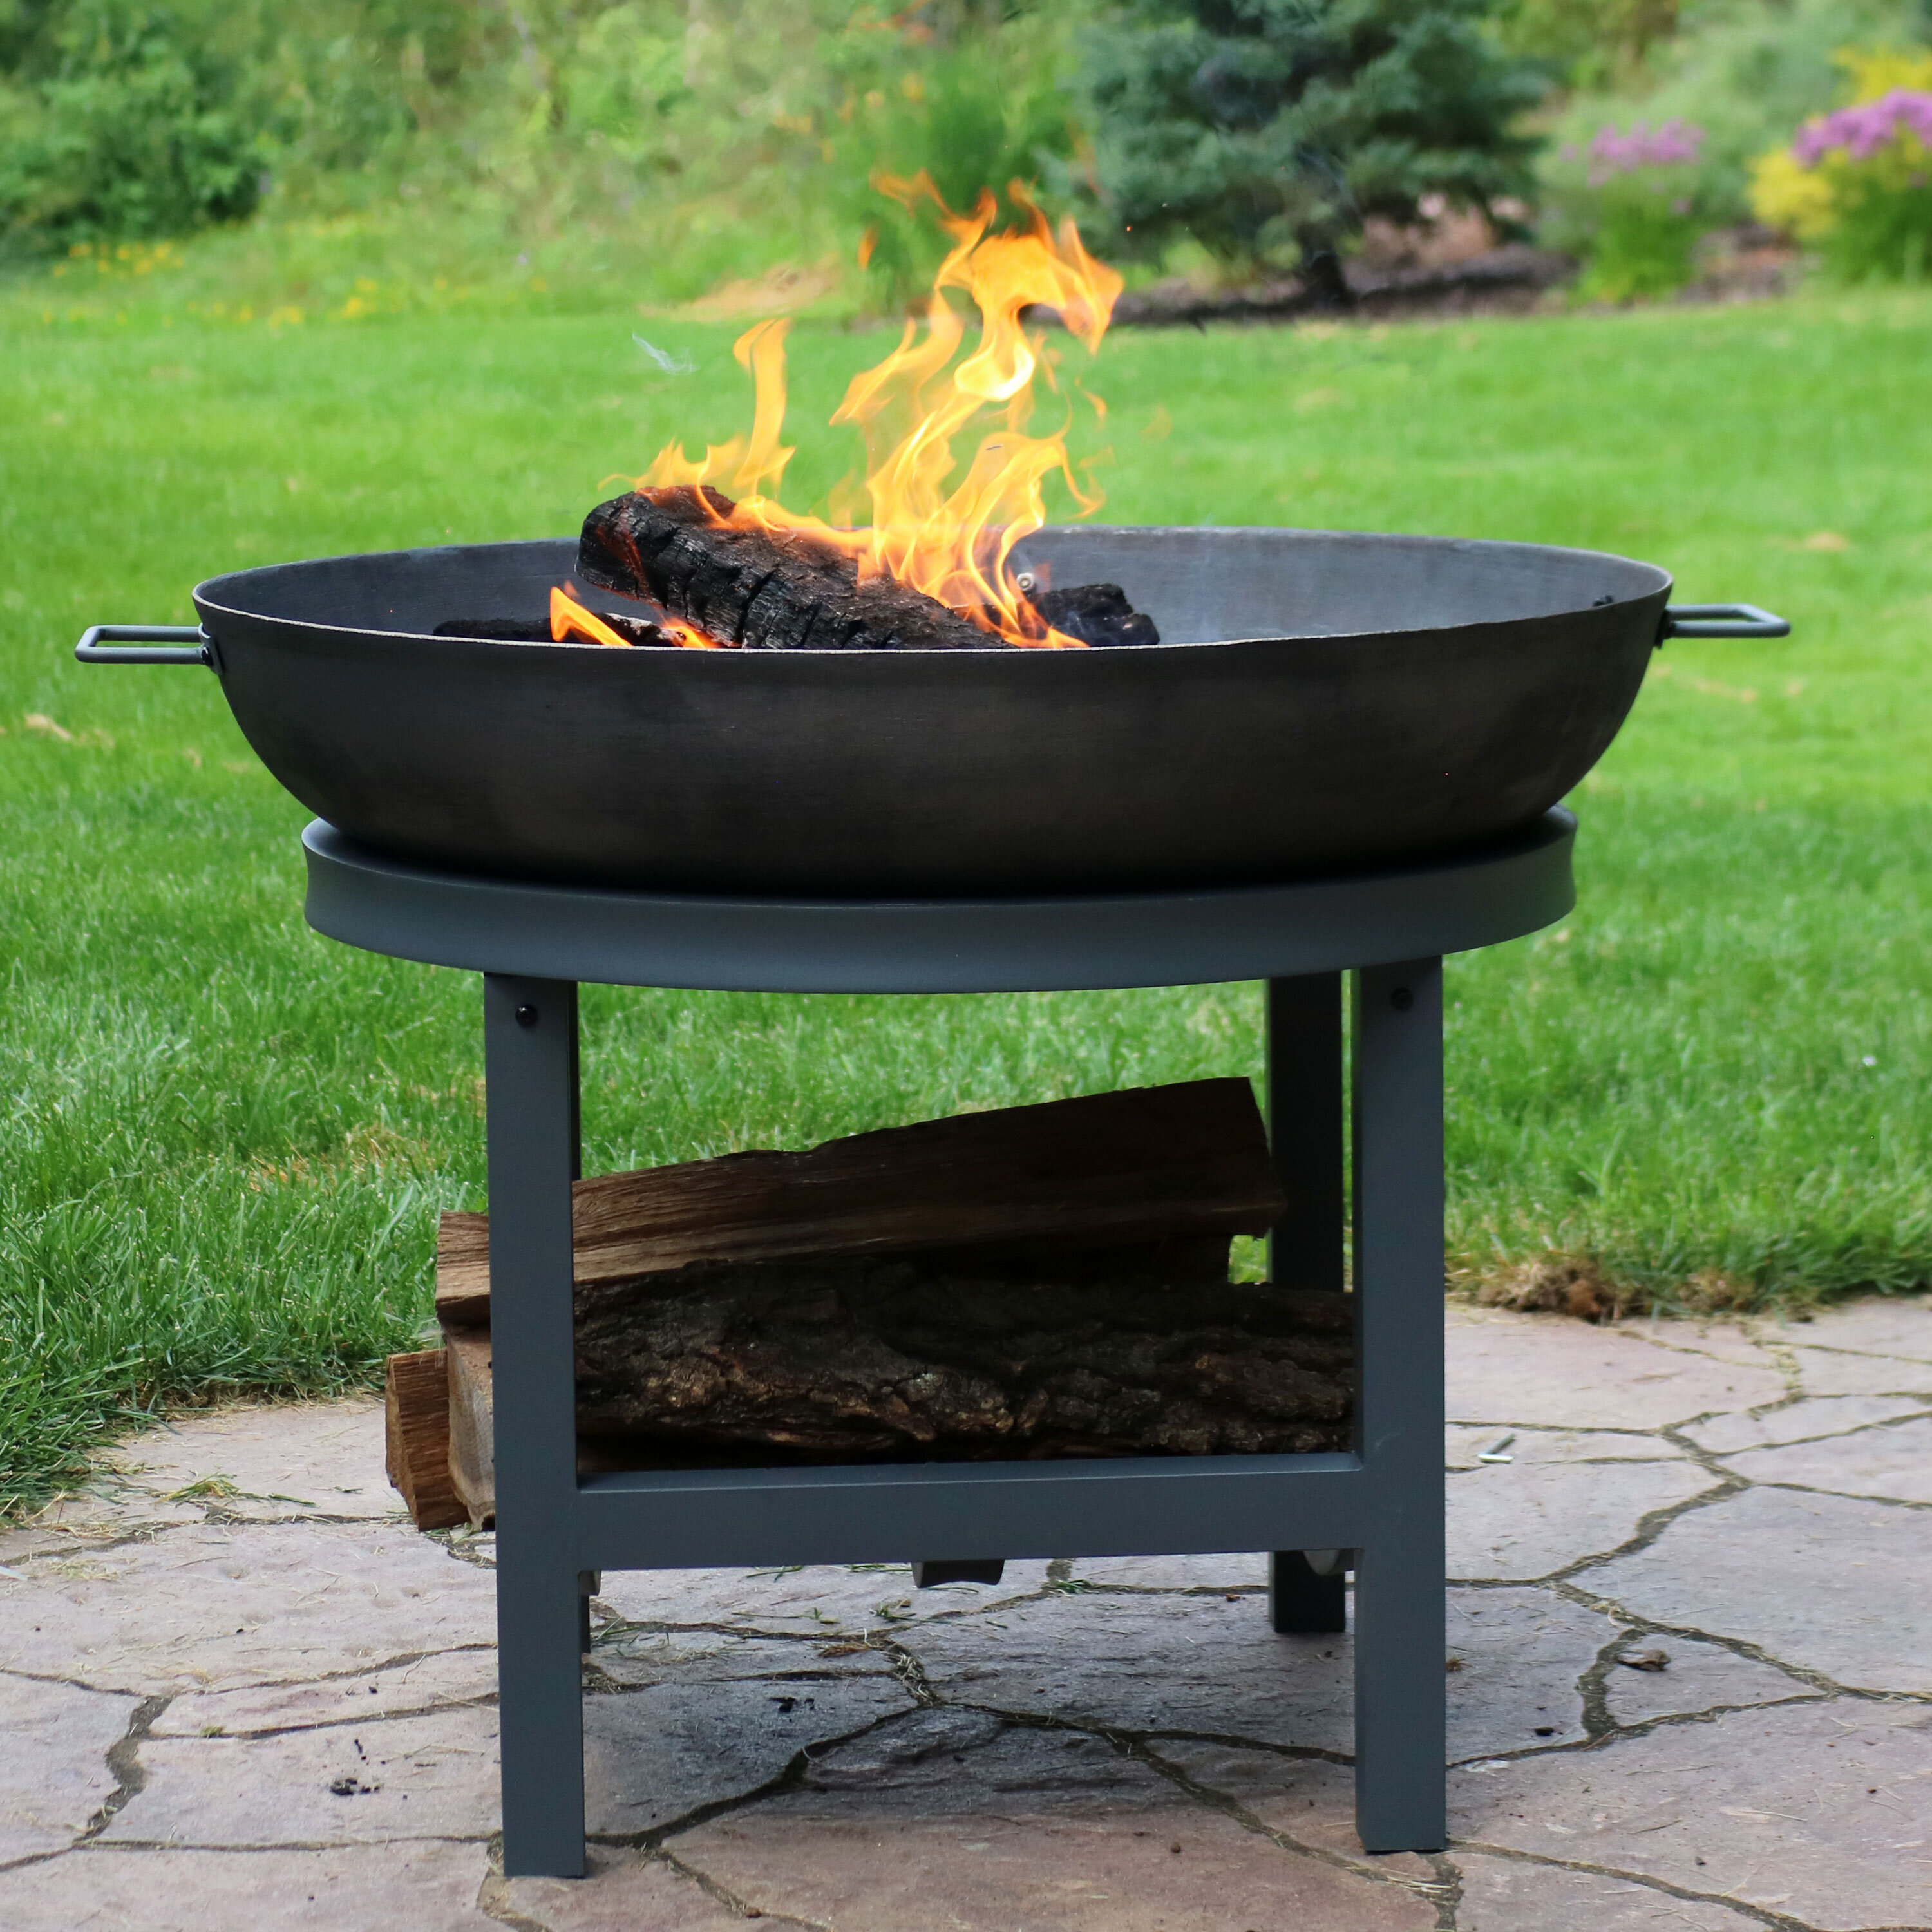 30'' Fire Pit Outdoor Wood Burning Fire Pits Steel BBQ Grill Wood Burning Outdoor Fireplace Garden Beaches Camping 